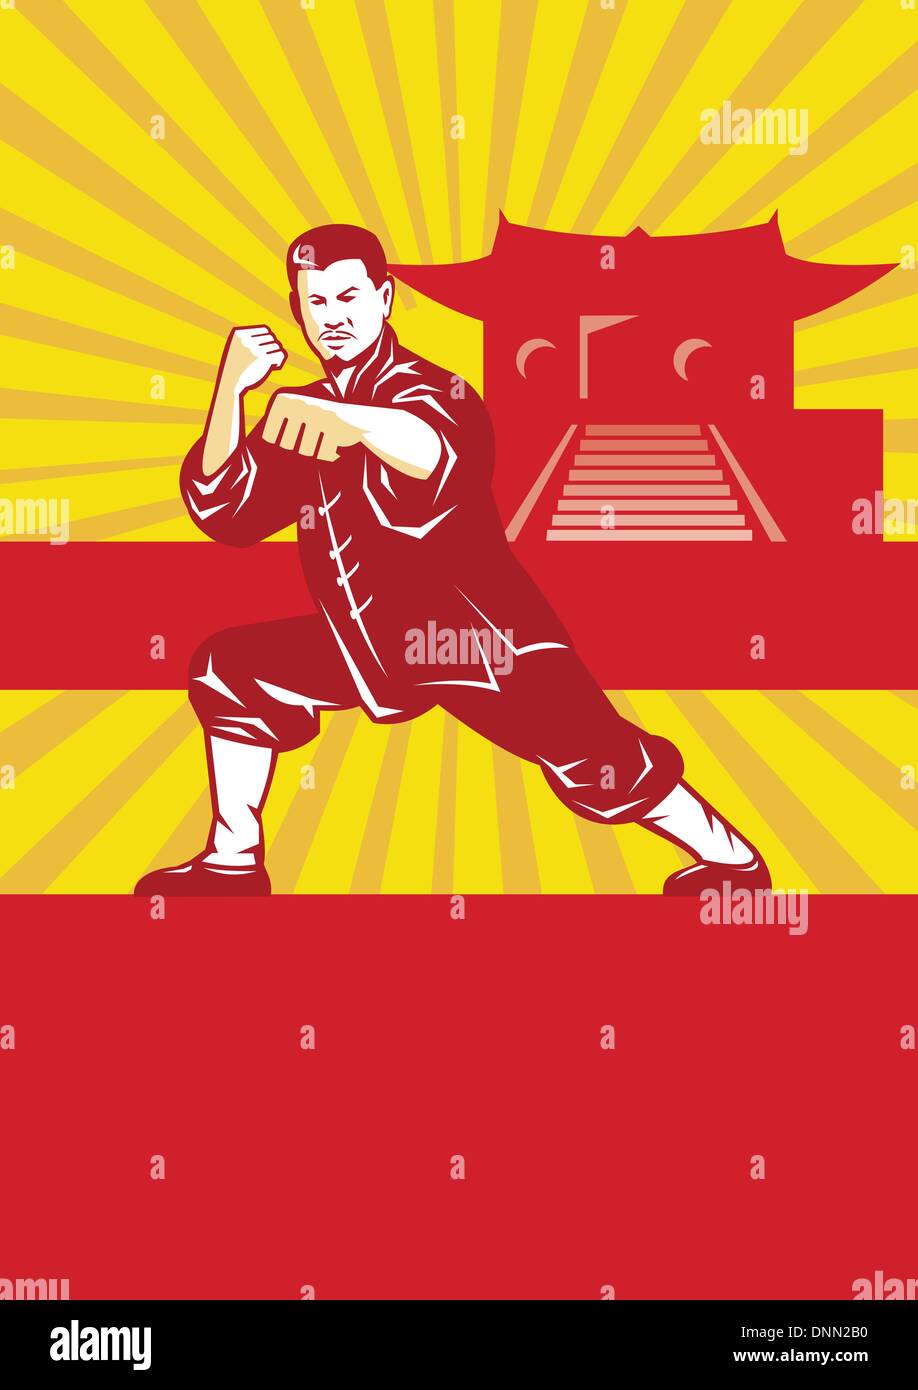 Illustration of shaolin kung fu martial arts karate master in fighting stance with temple and sunburst in background set inside Stock Vector